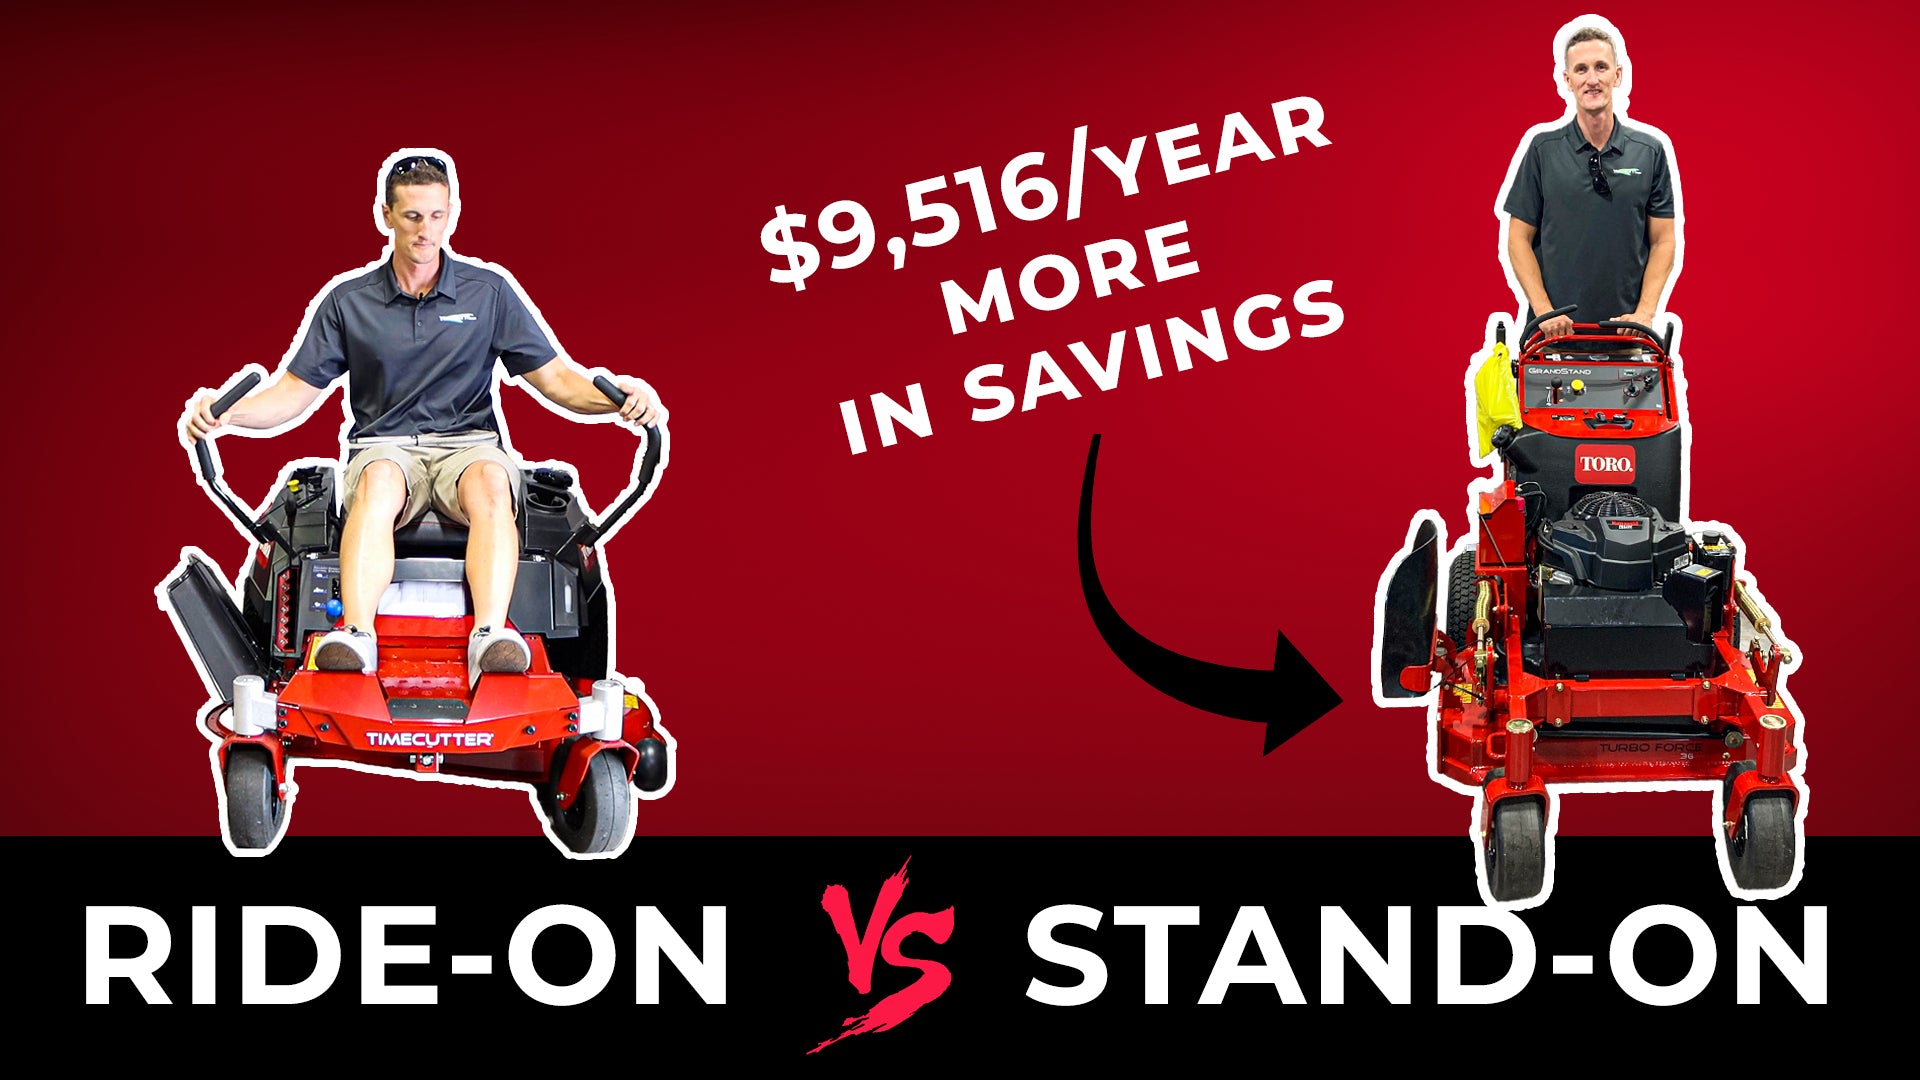 Stand-On Mowers will saves you $9,516/year more. Here's the math to prove it...